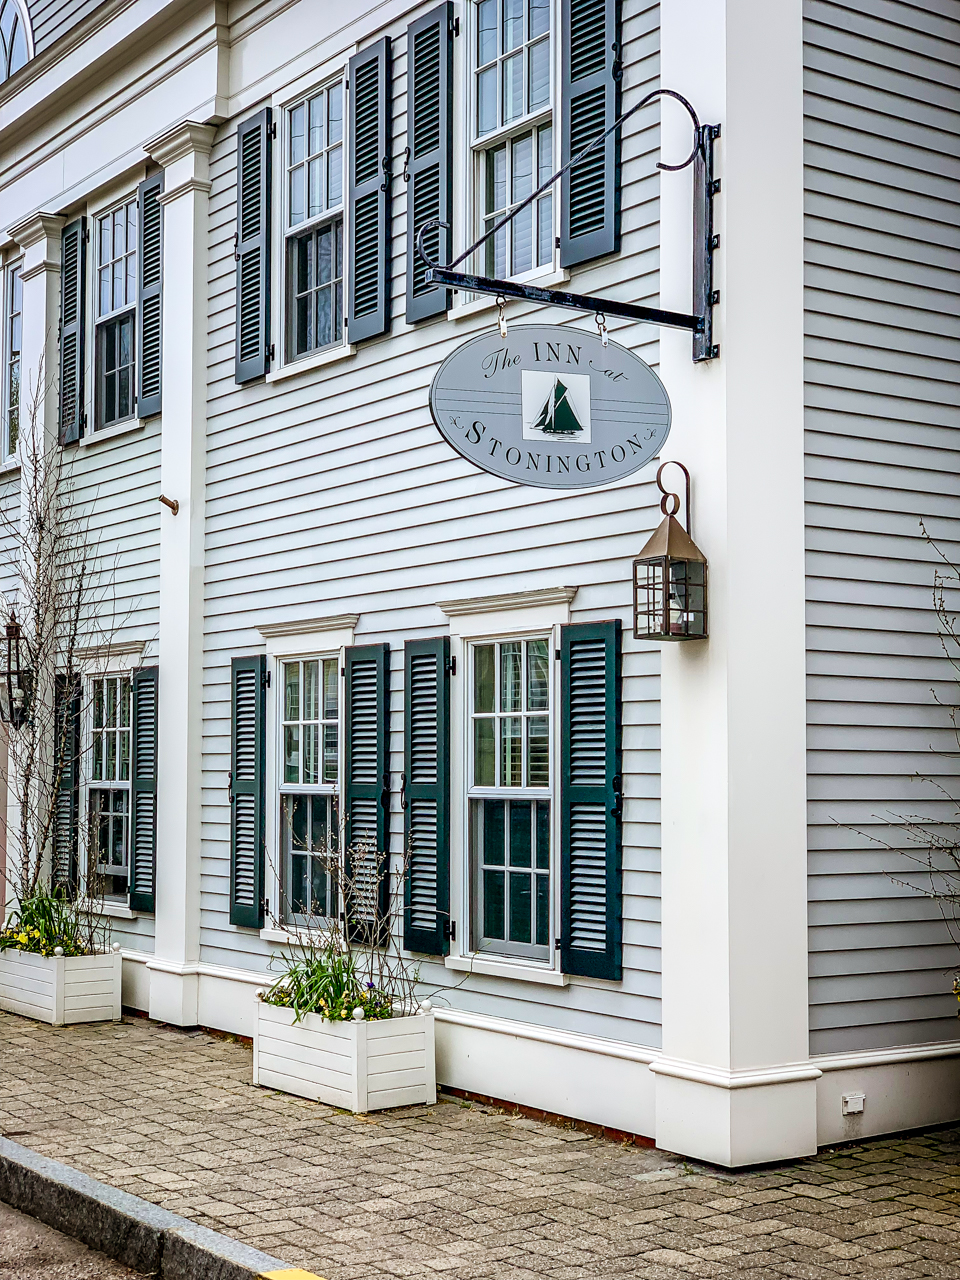 Top 10 Things to Do in Stonington CT on your Weekend Getaway featured by top US travel blogger, Shannon Shipman: image of the inn at stonington